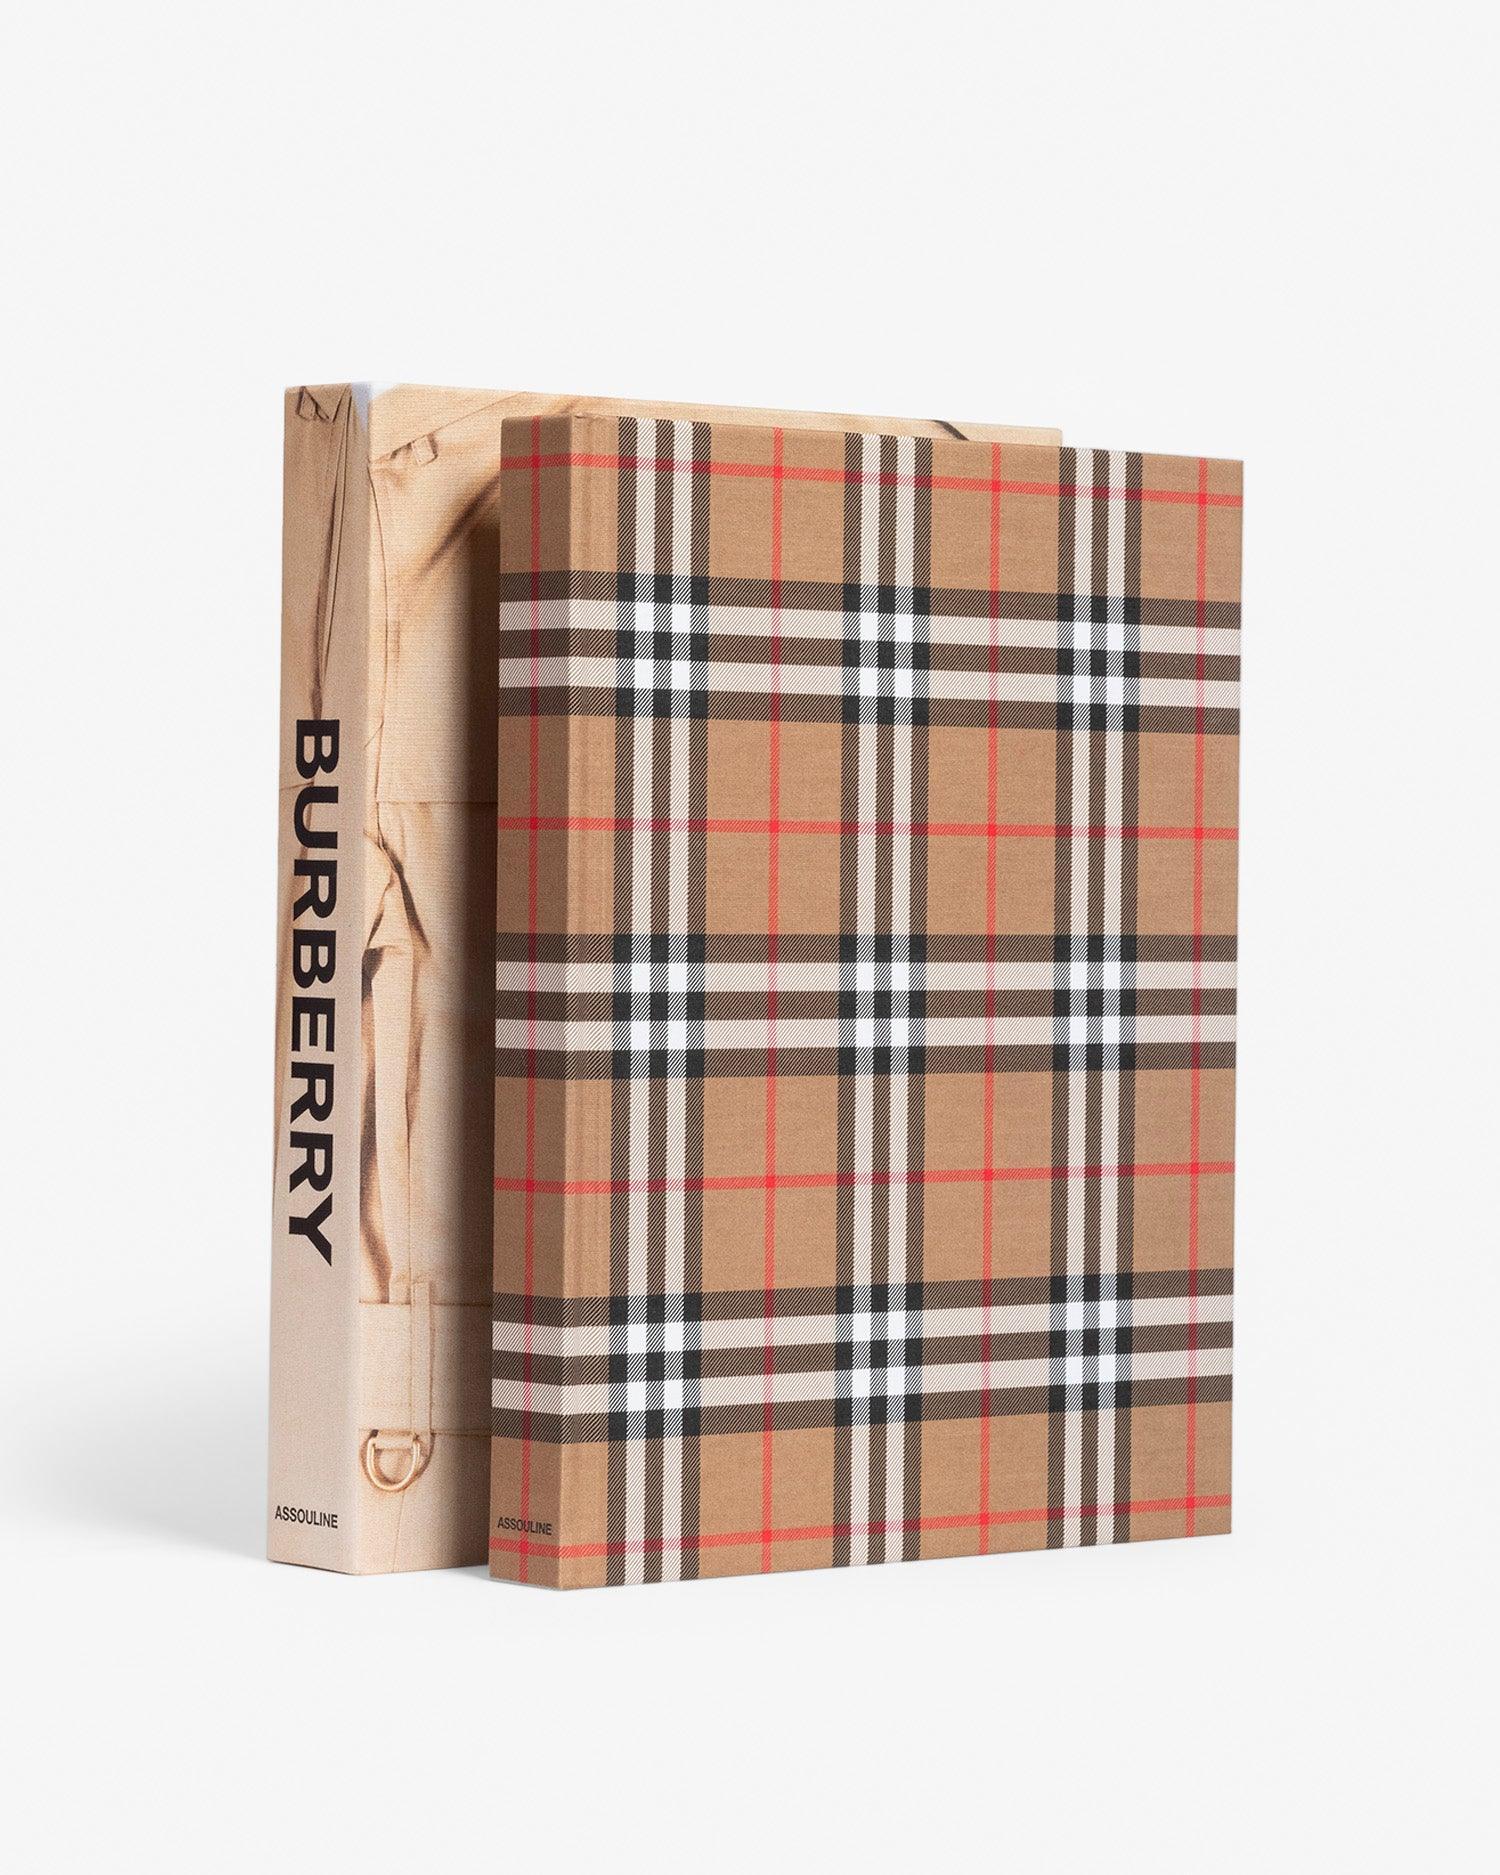 Burberry by Alexander Fury - Coffee Table Book | ASSOULINE